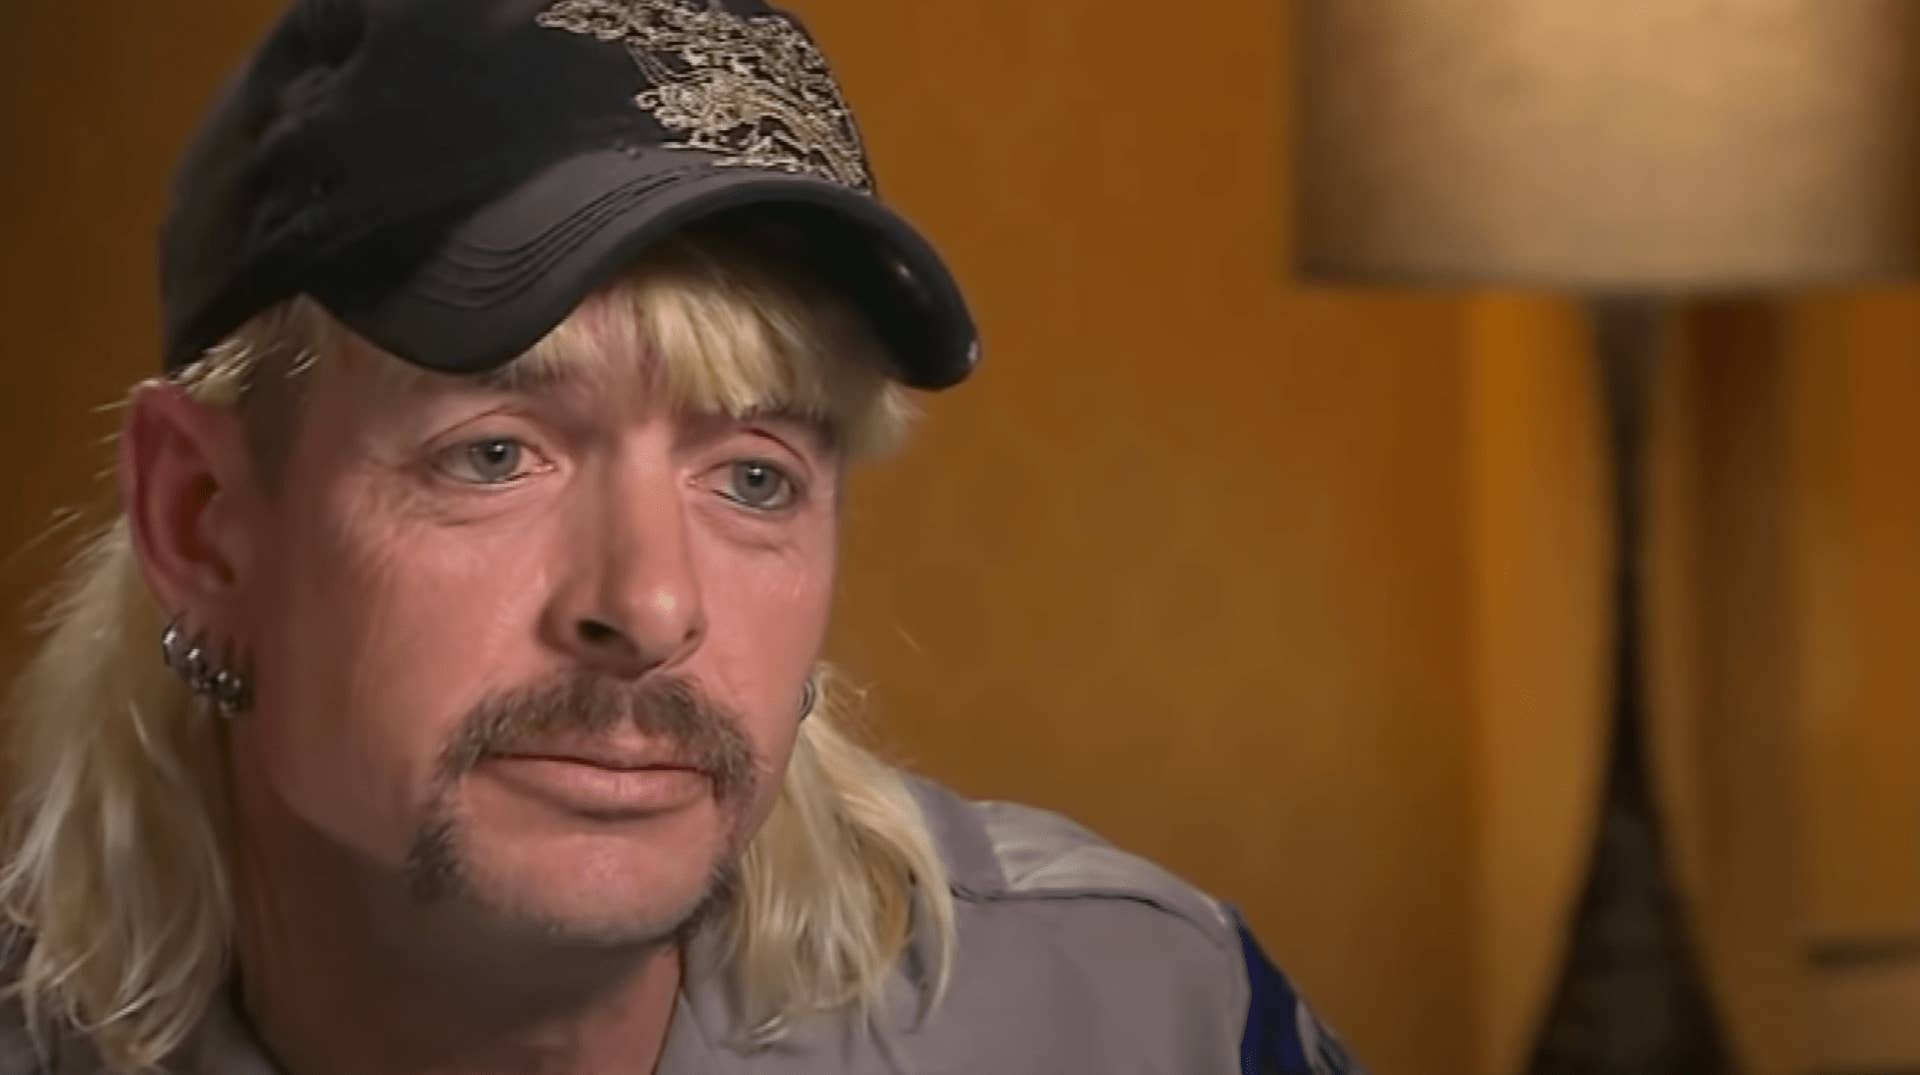 Joe Exotic on Inside Edition during interview